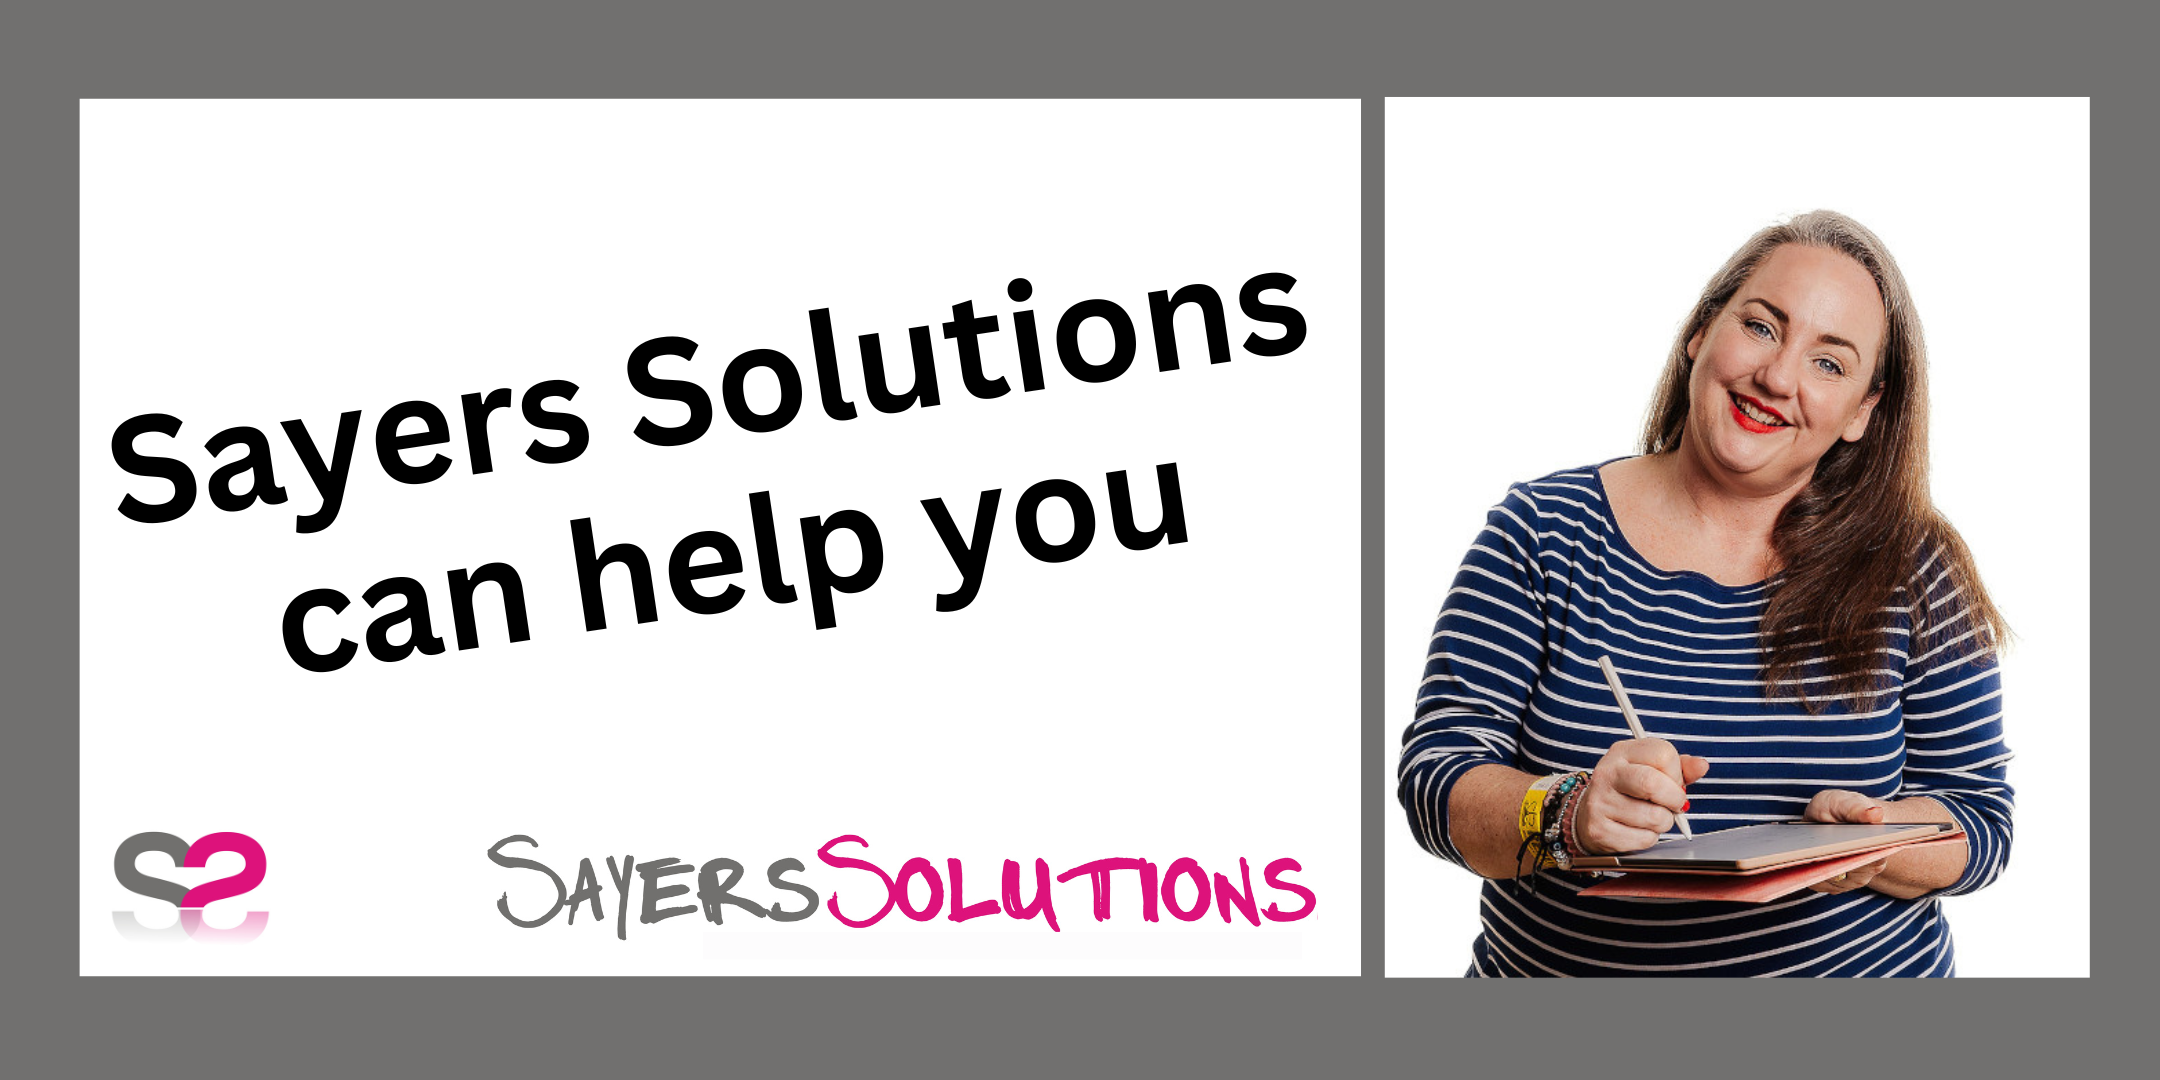 How can Sayers Solutions help you?